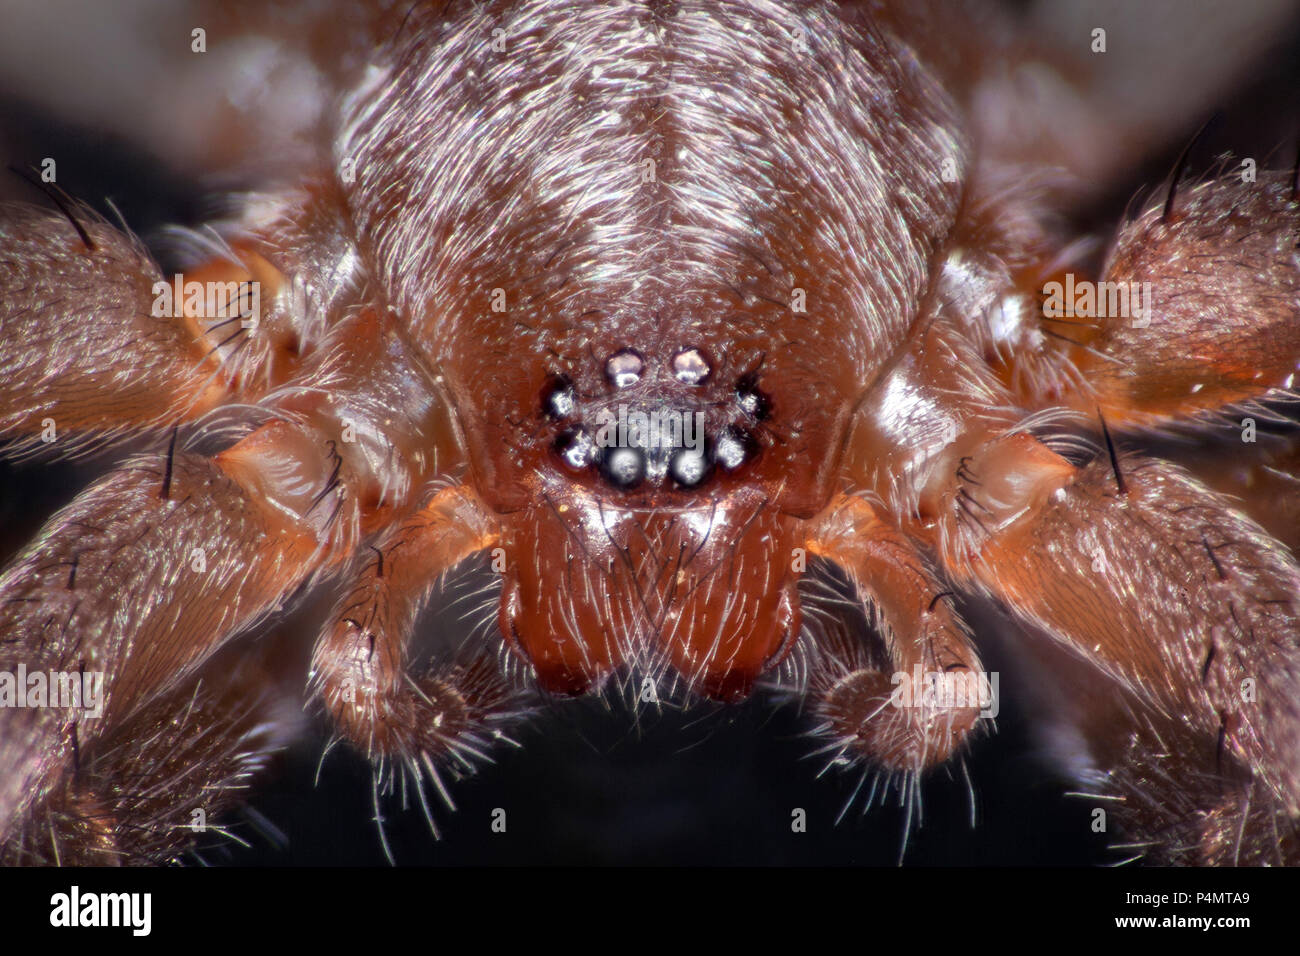 Spider, Drassodes sp.close-up showing prominent eyes Stock Photo